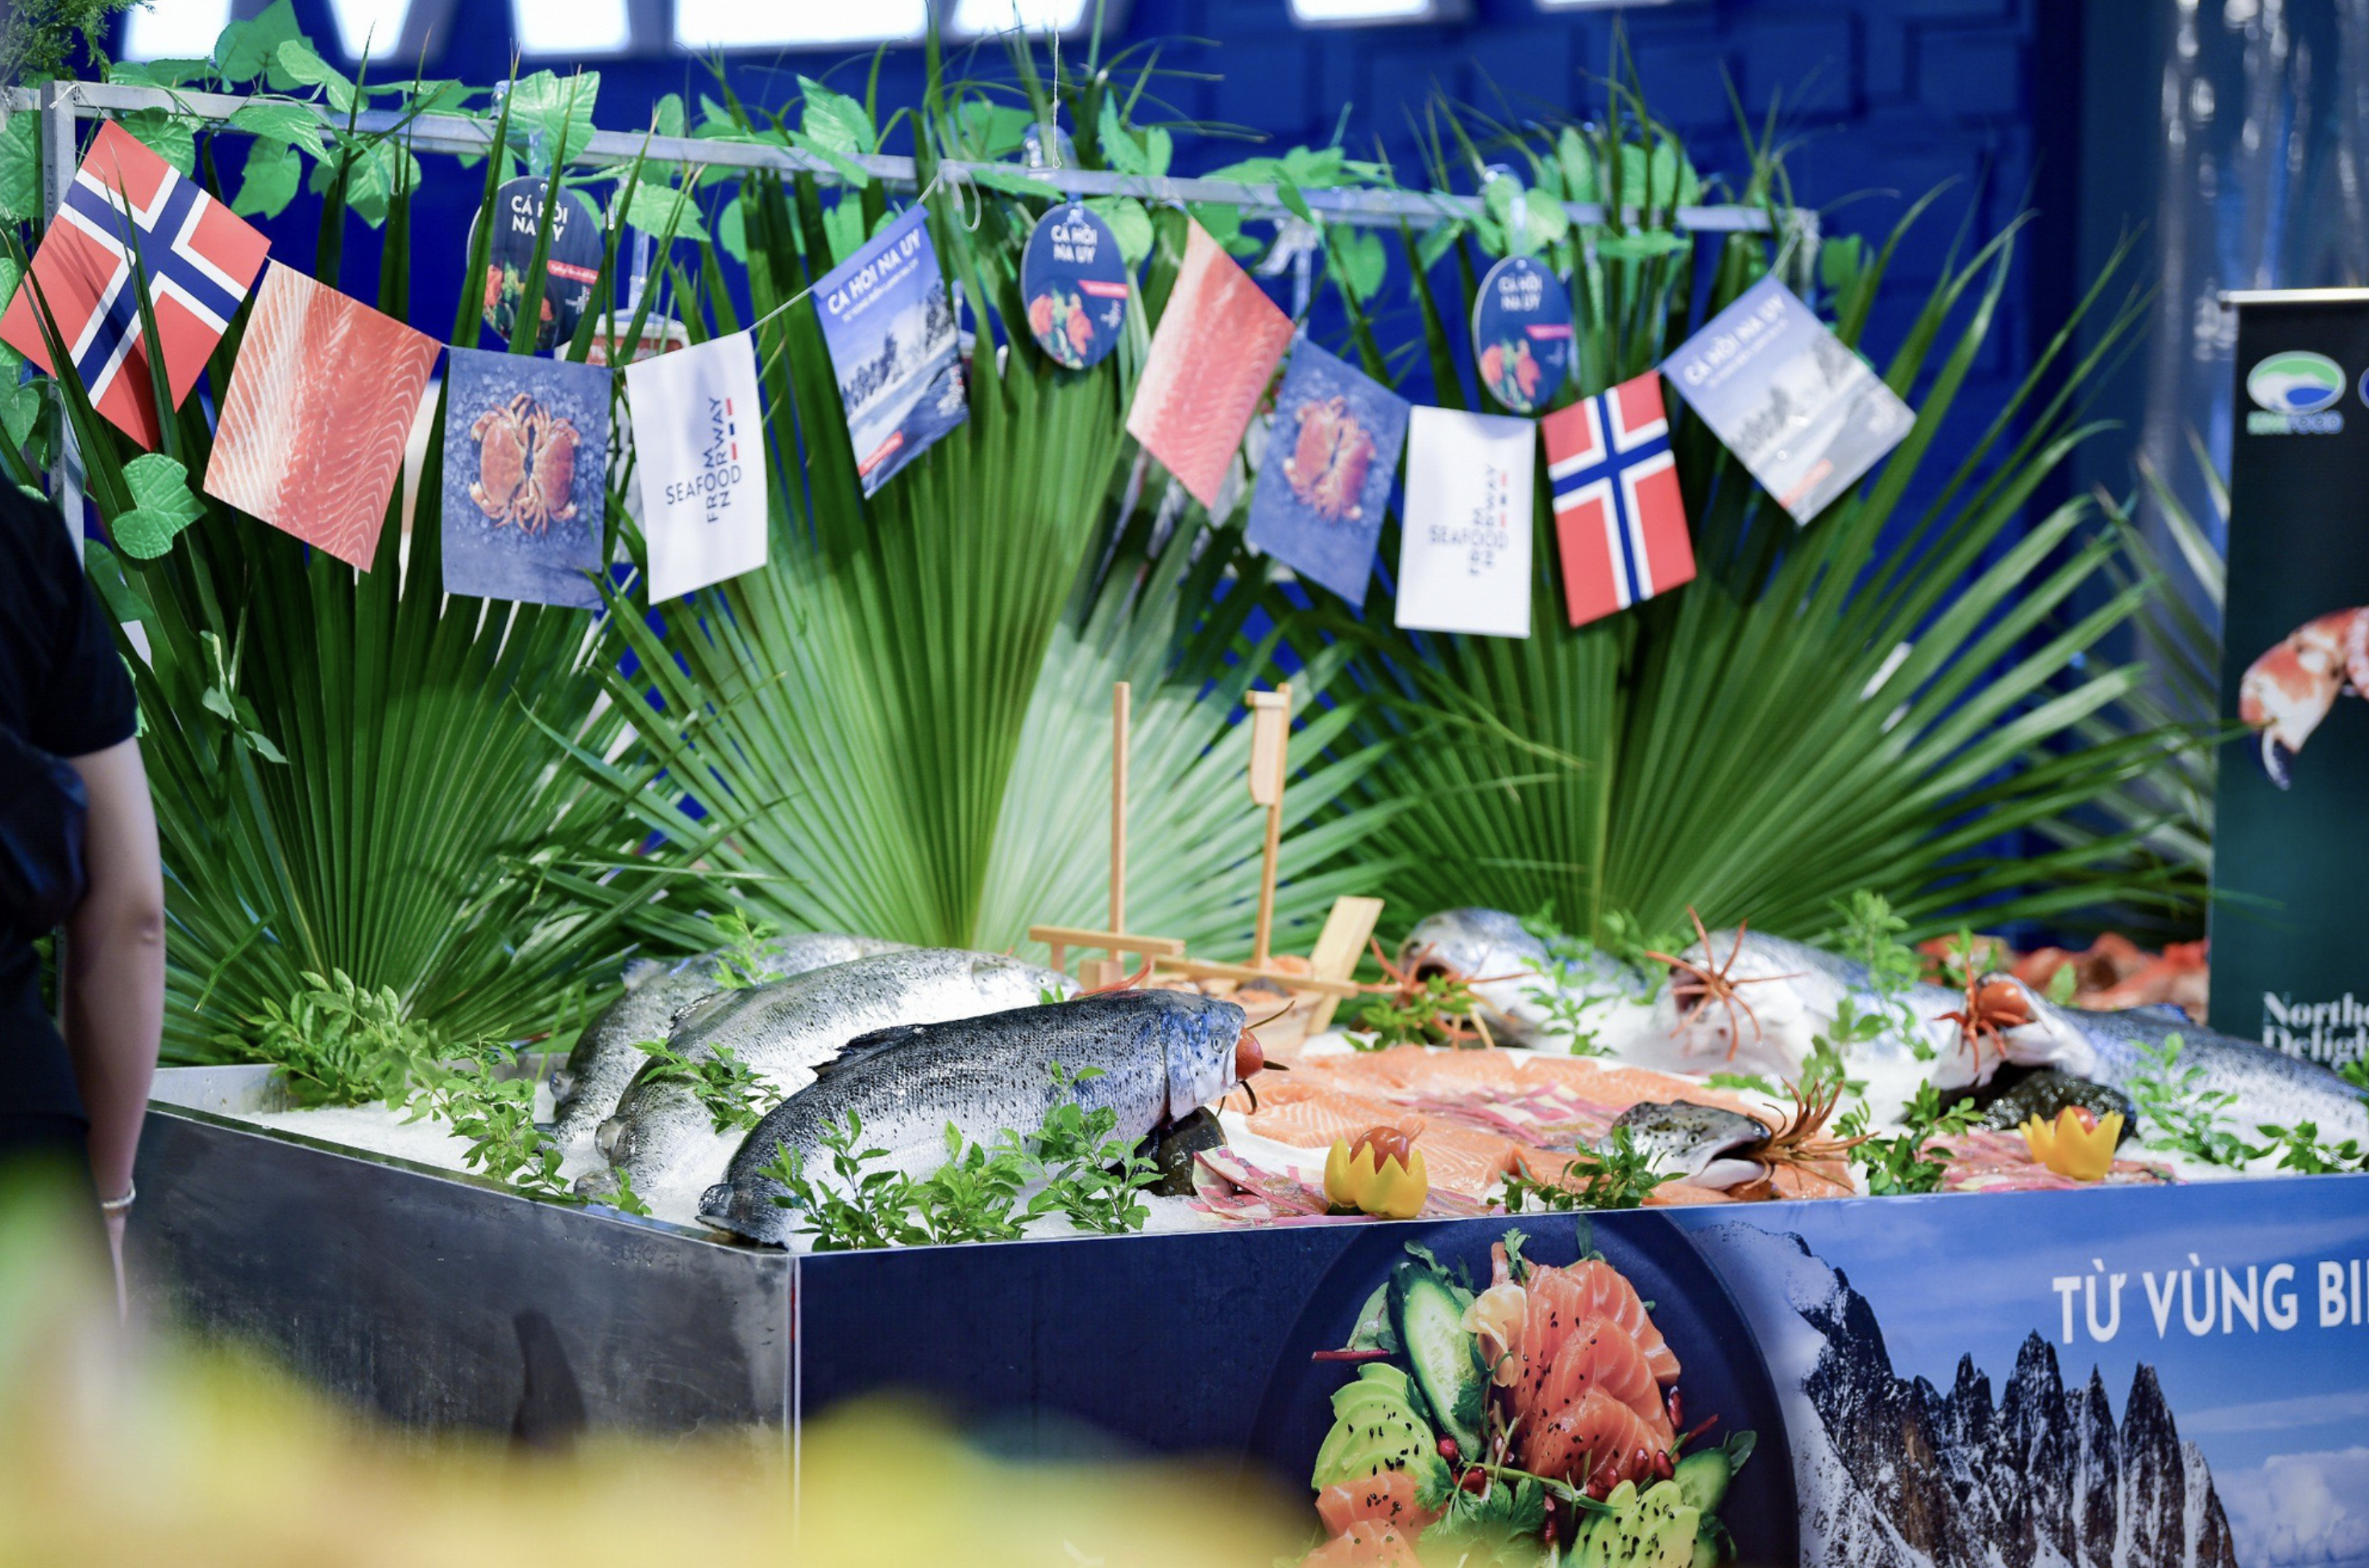 Salmon, mackerel, and crabs from Norway are favored by Vietnamese. Photo: Nam Tran / Tuoi Tre